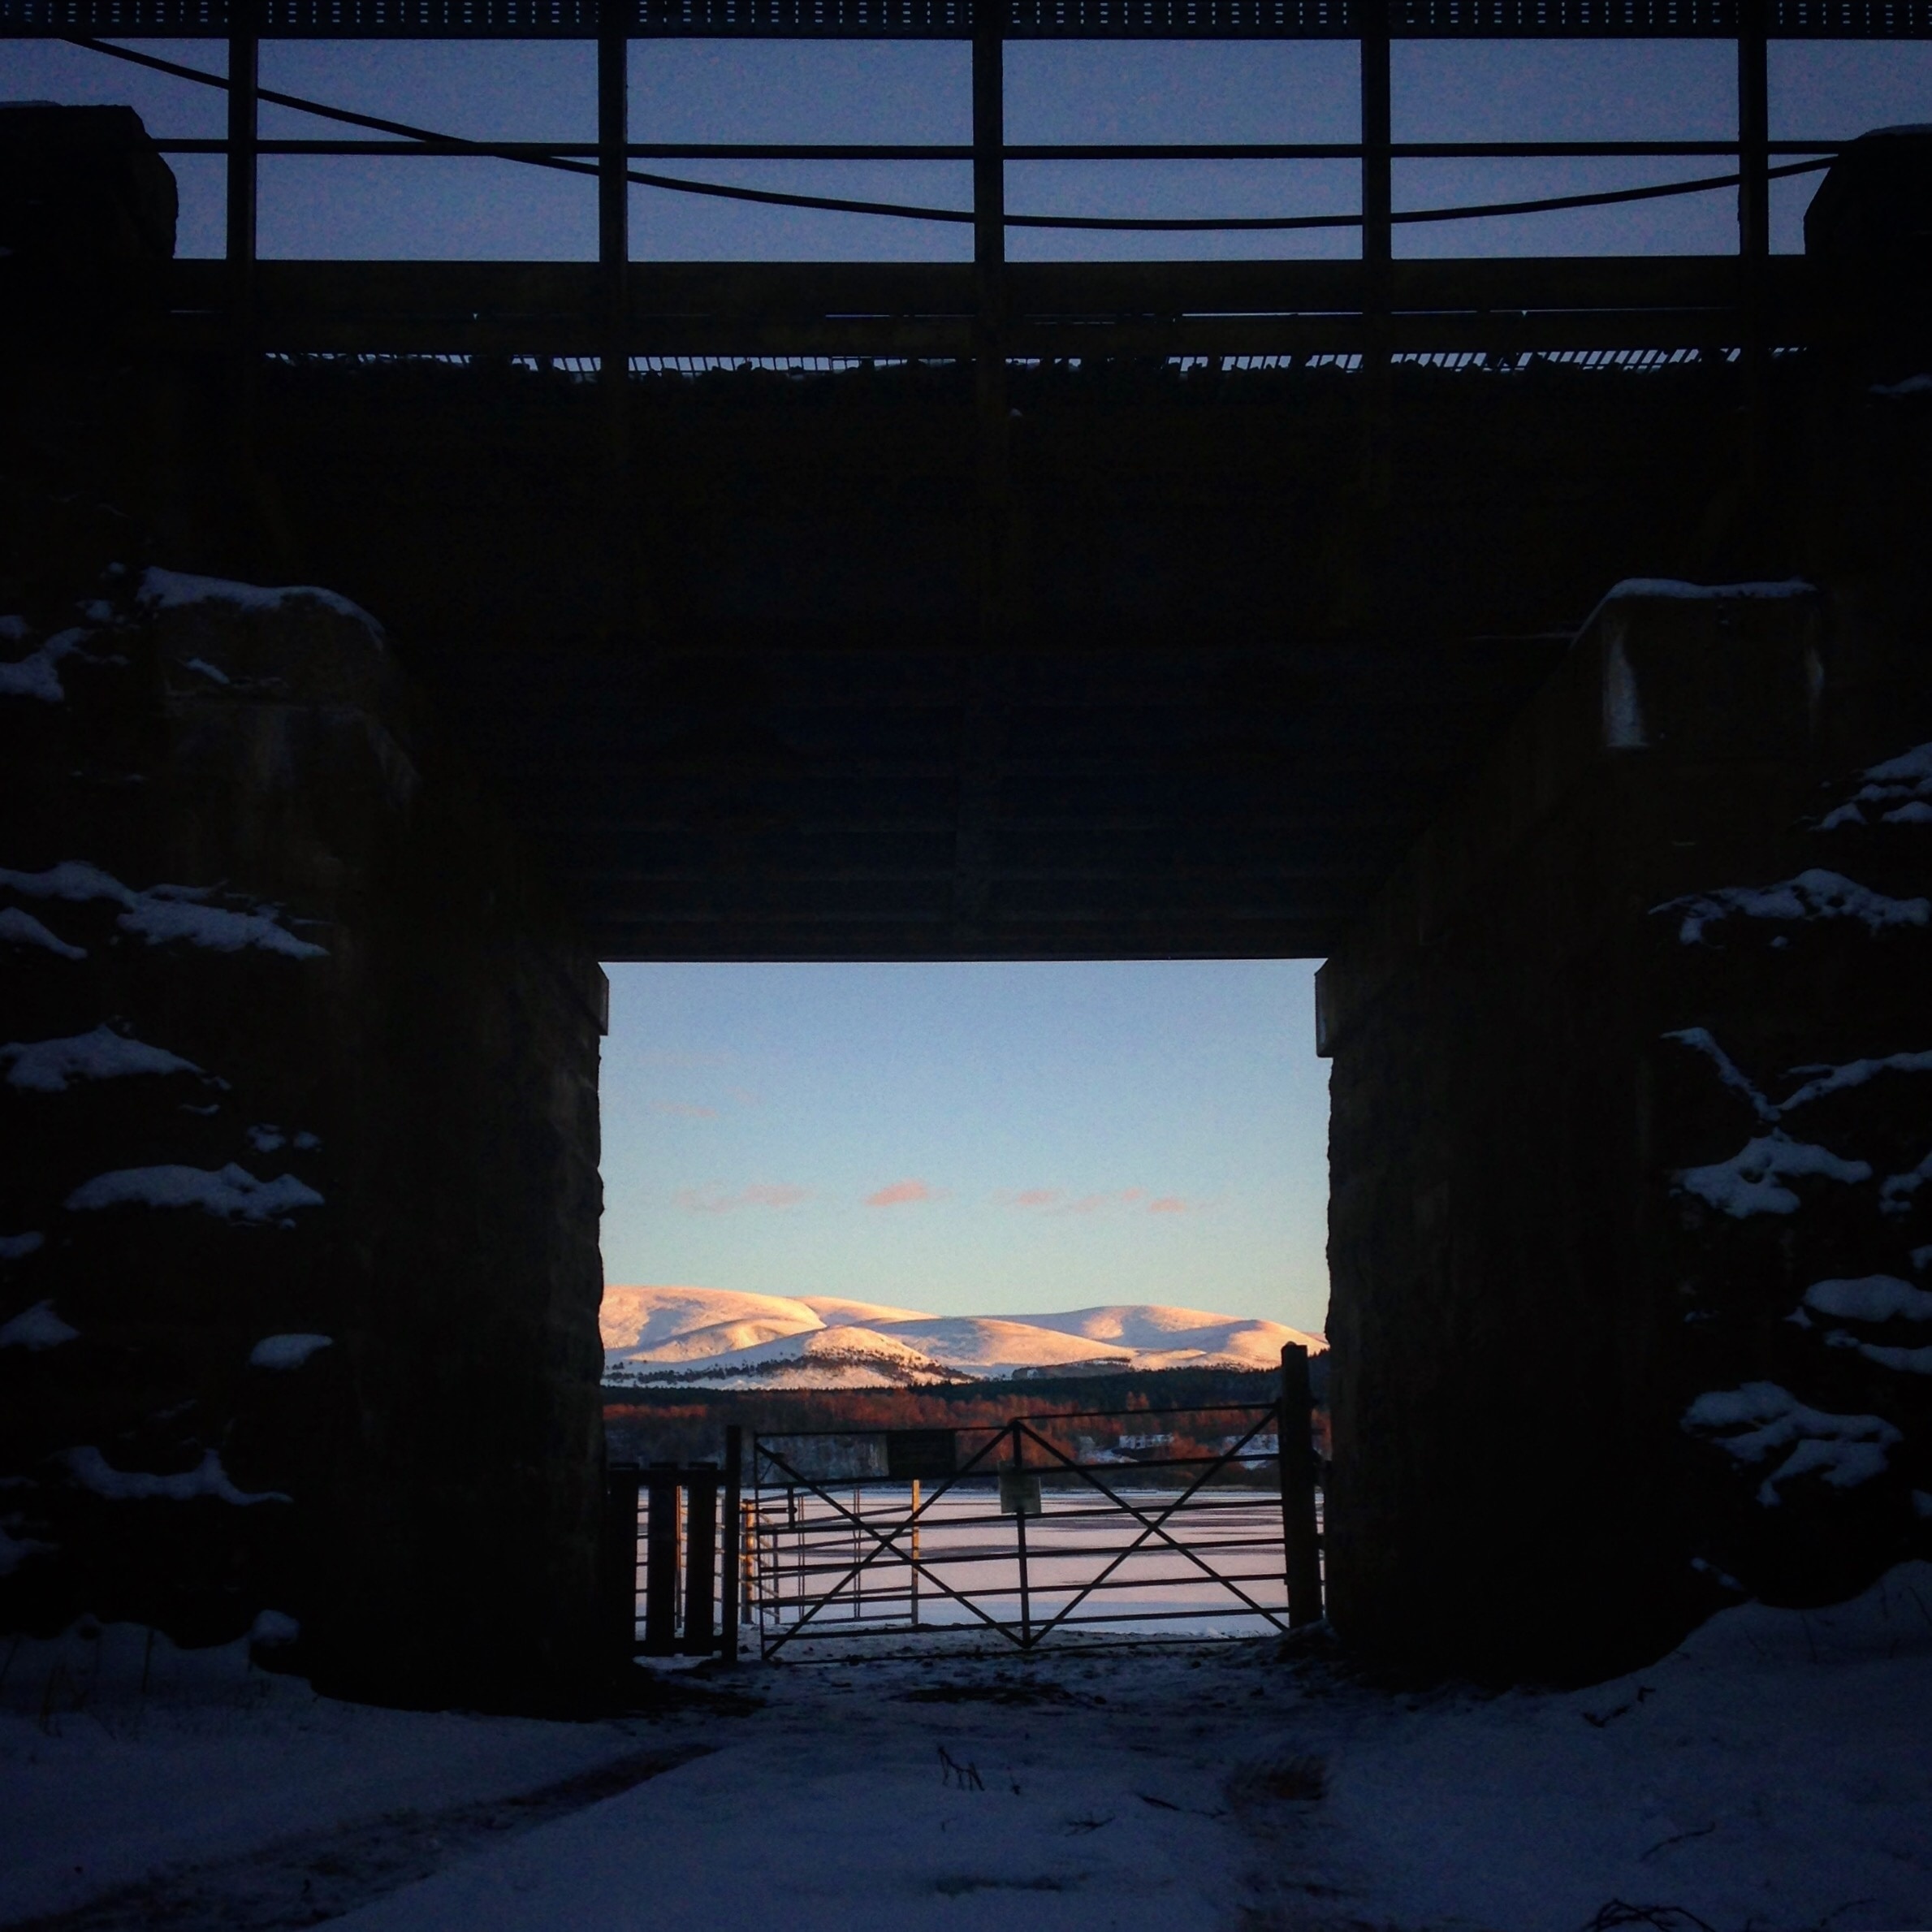 📍Loch Insh, Kincraig.

A view of the Cairngorm Mountains over a frozen Loch Insh and through the underpass of the railway line.